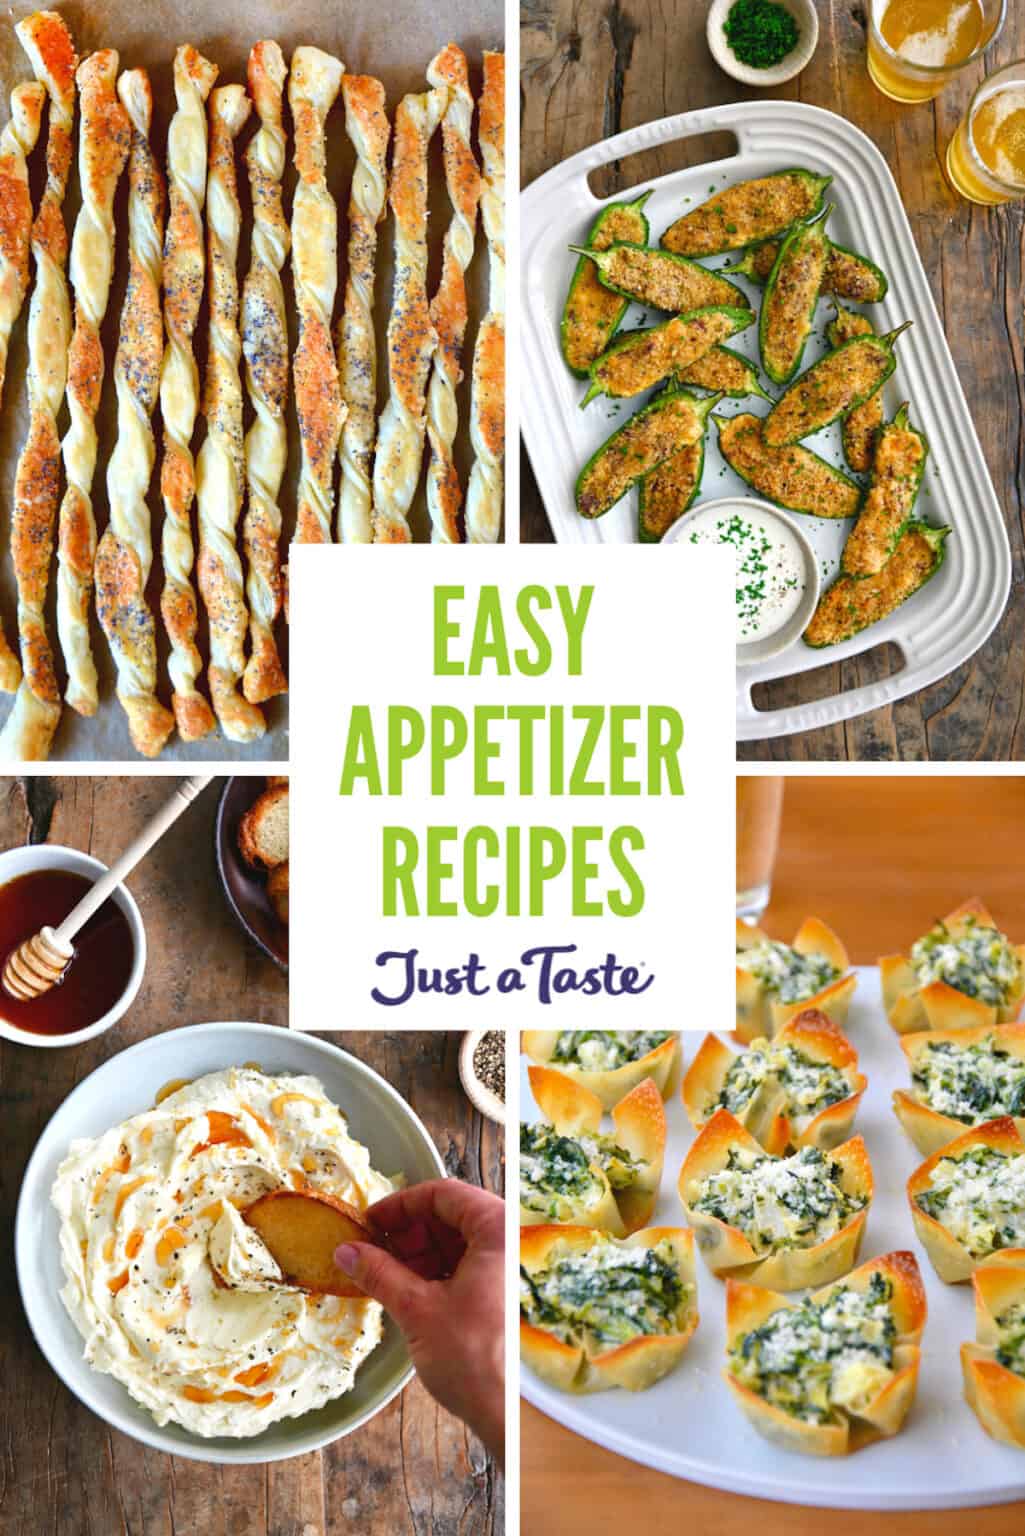 Easy Appetizer Recipes - Just a Taste